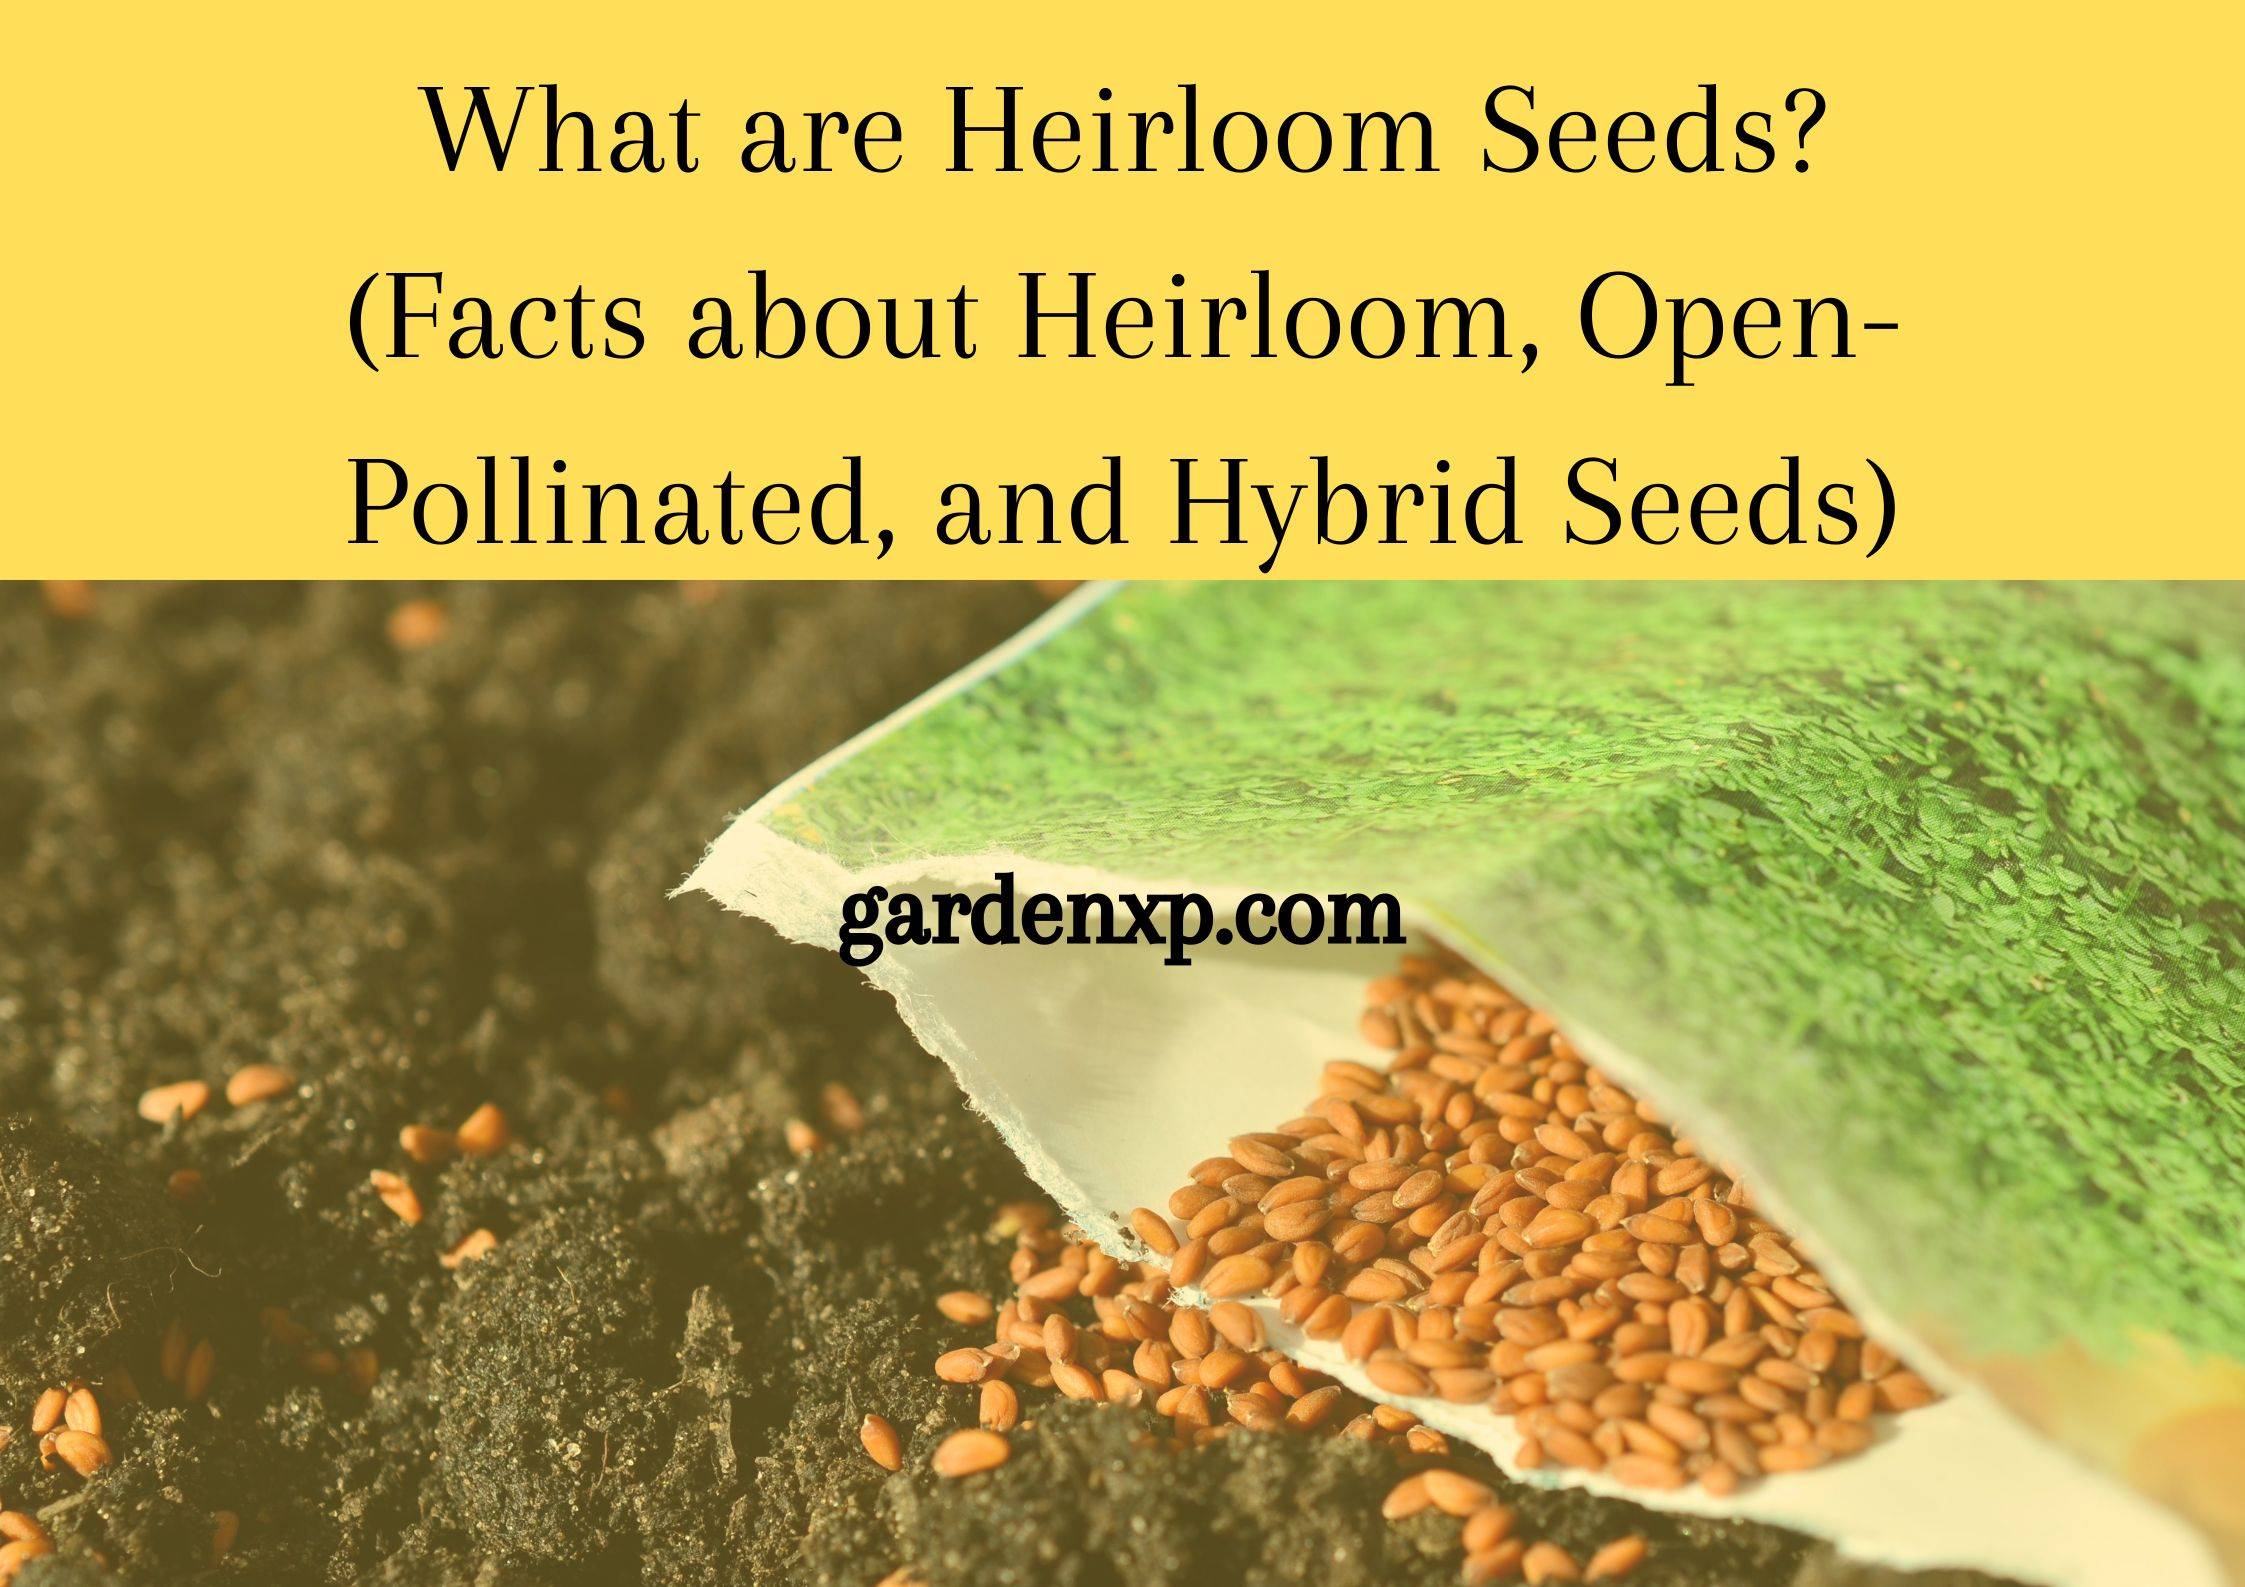 What are Heirloom Seeds? (Facts about Heirloom Open-Pollinated and Hybrid Seeds)